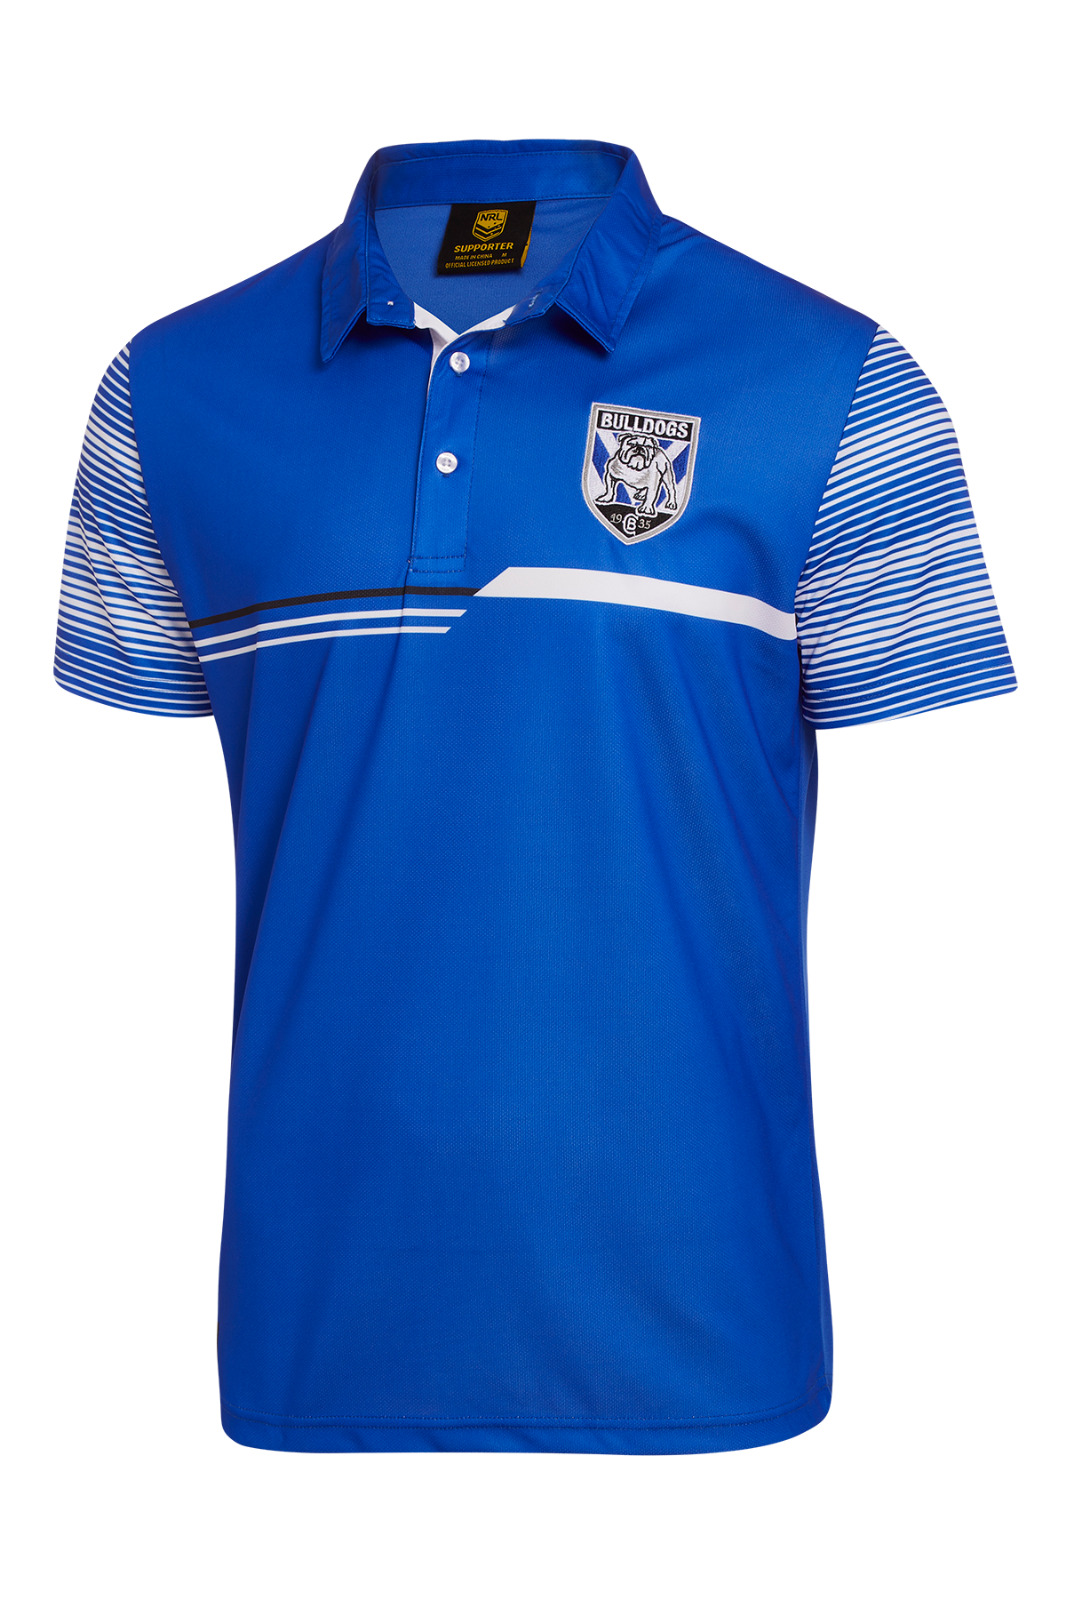 S18 Details about   Canterbury Bankstown Bulldogs NRL Sublimated Polo Shirt Size S-5XL 